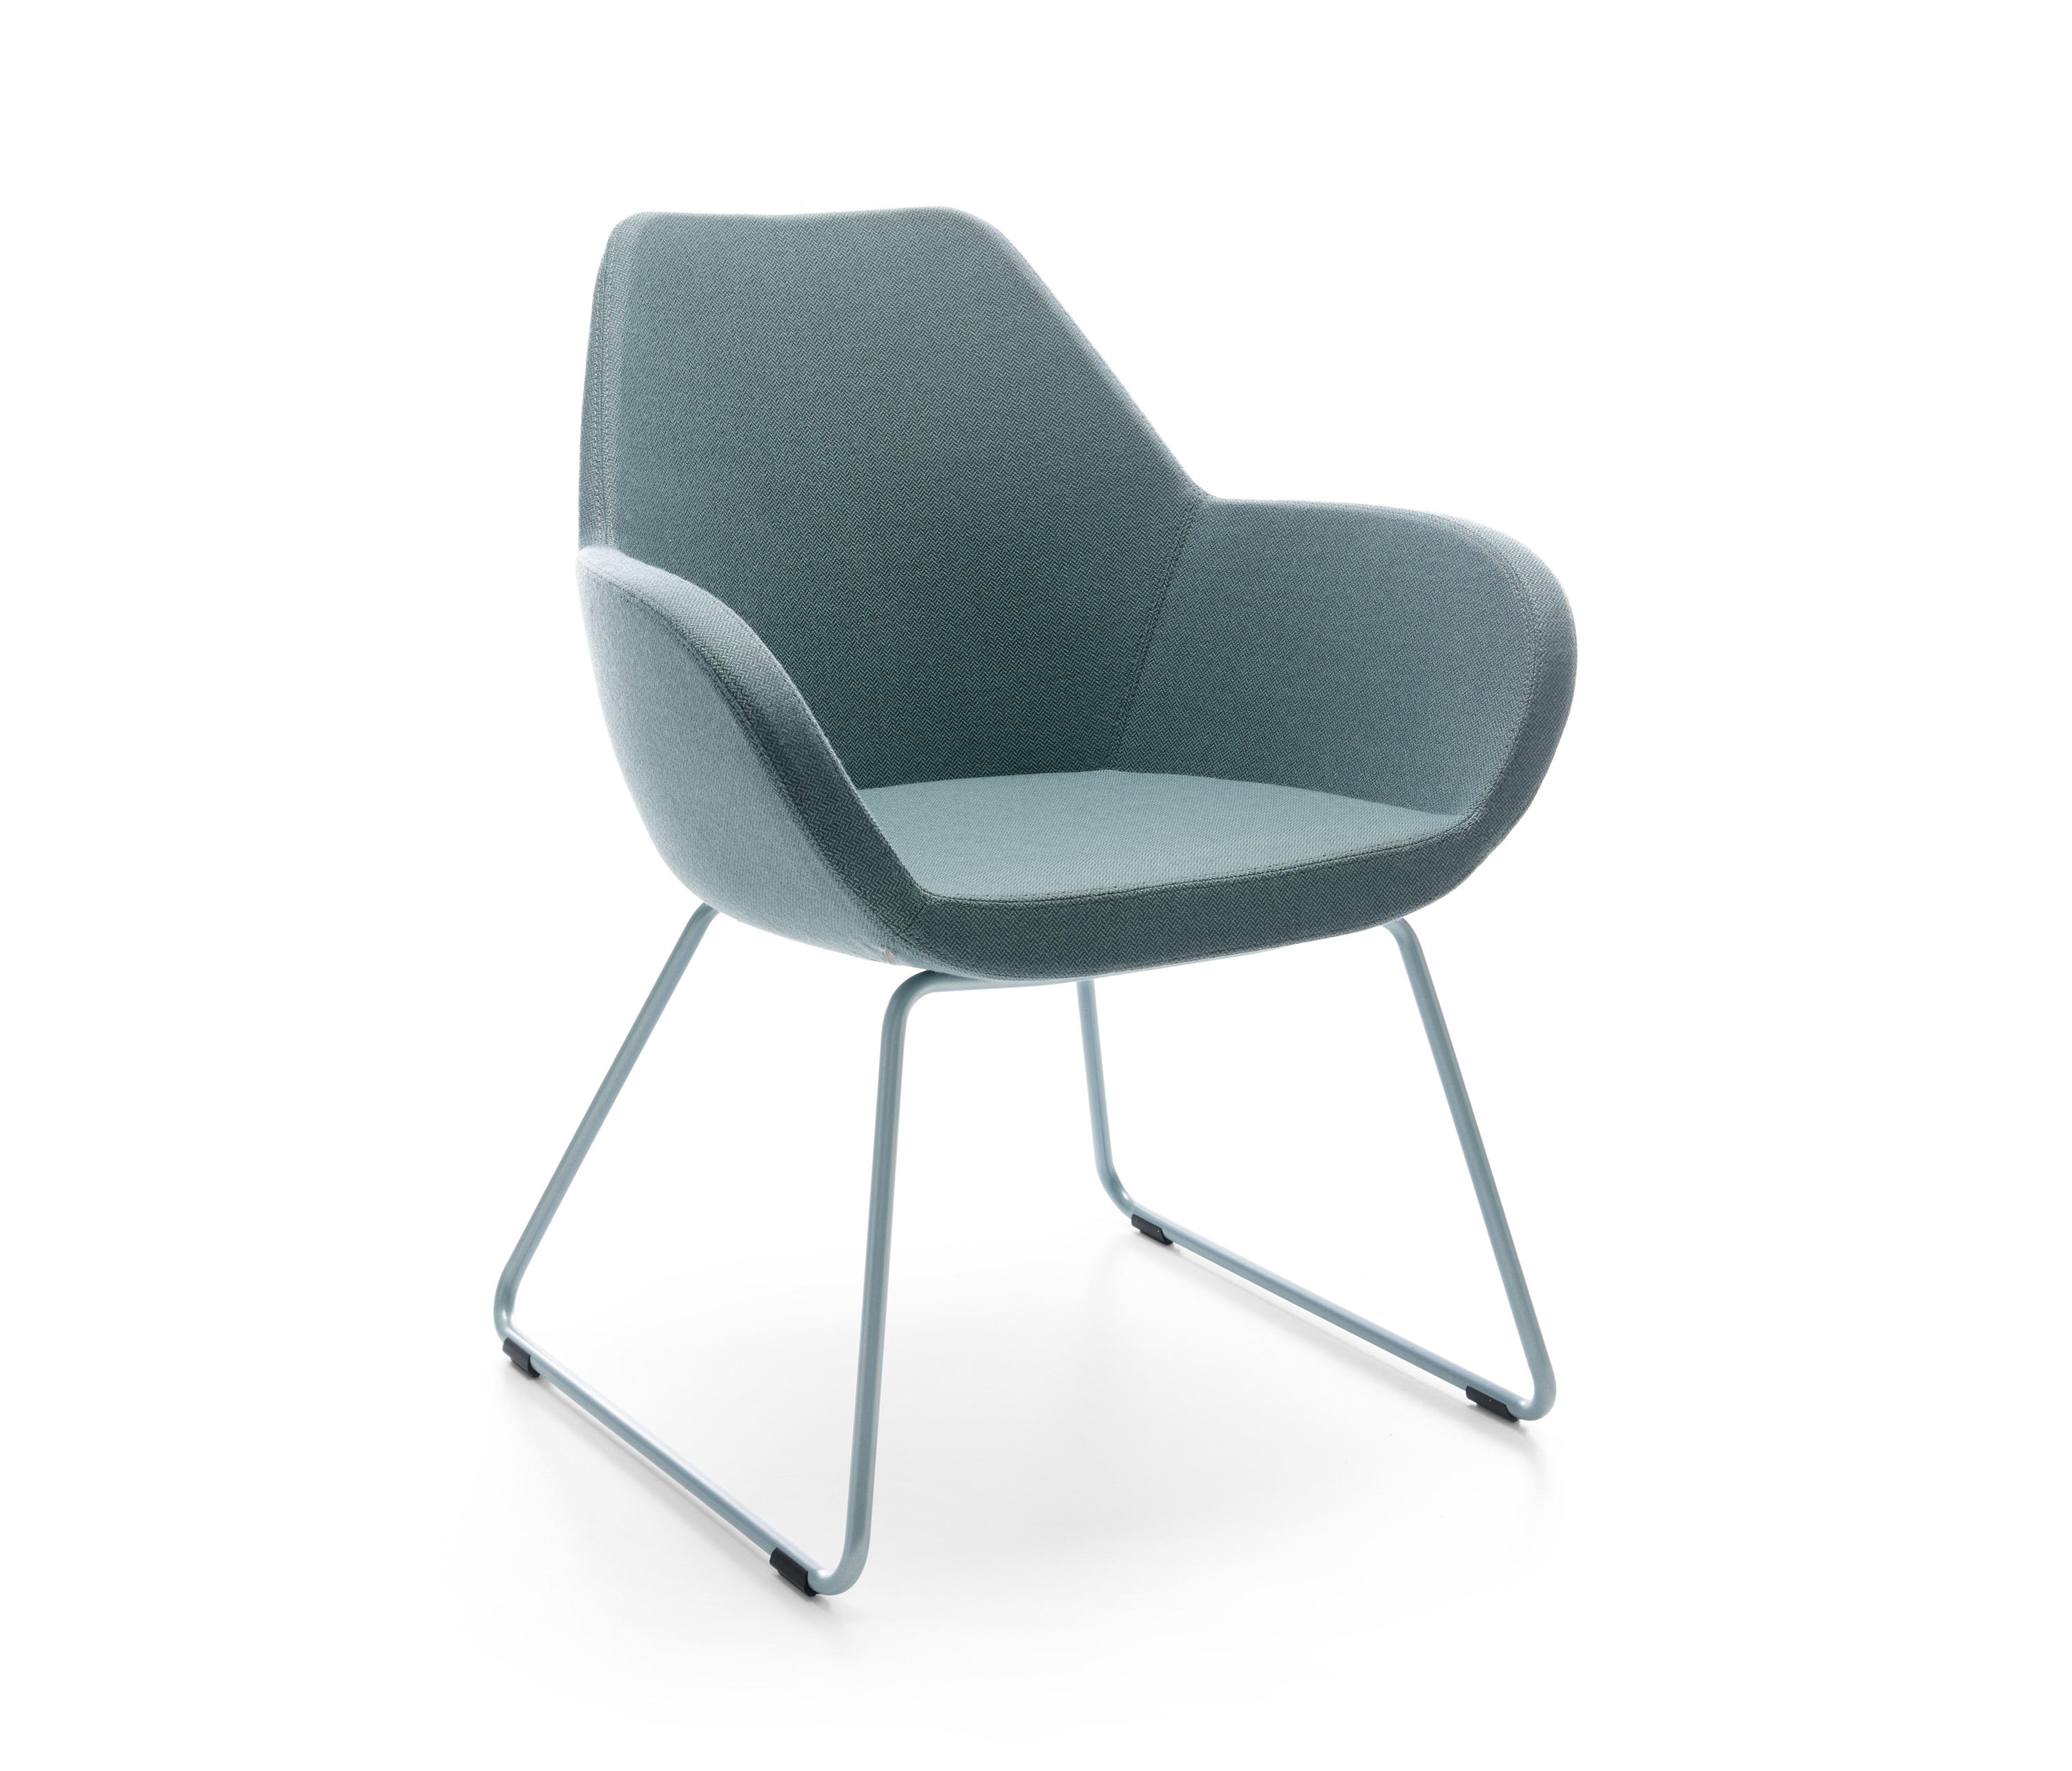 FAN - Chairs from PROFIM | Architonic